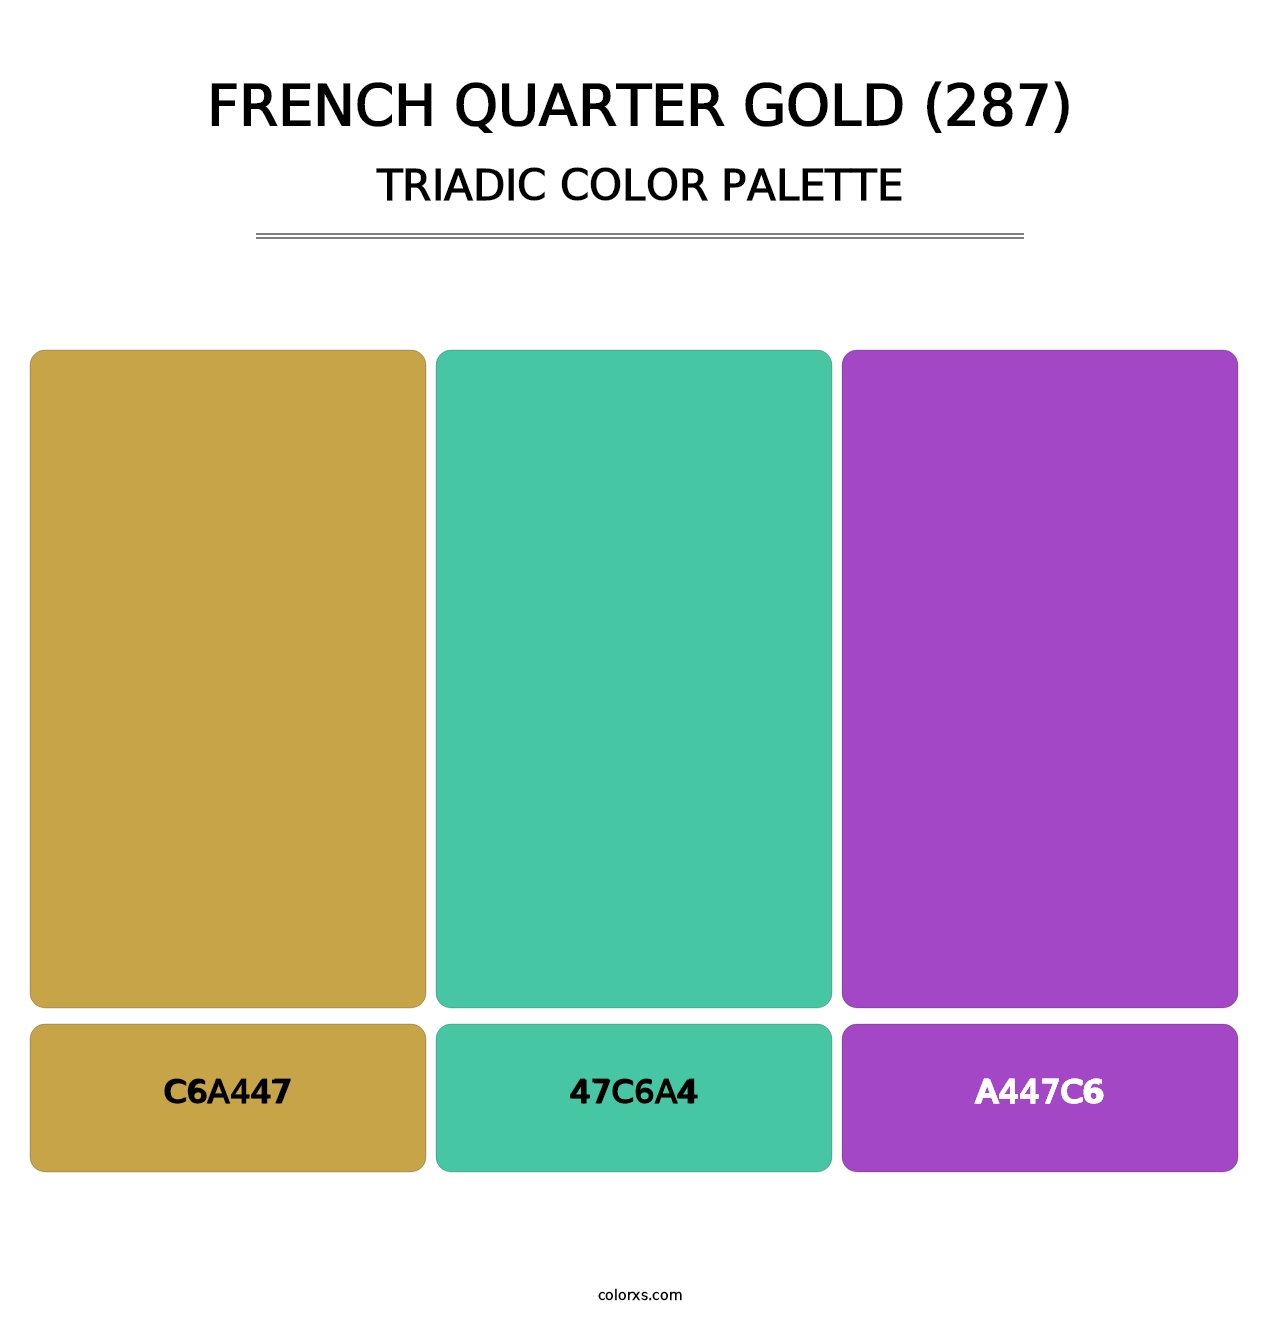 French Quarter Gold (287) - Triadic Color Palette